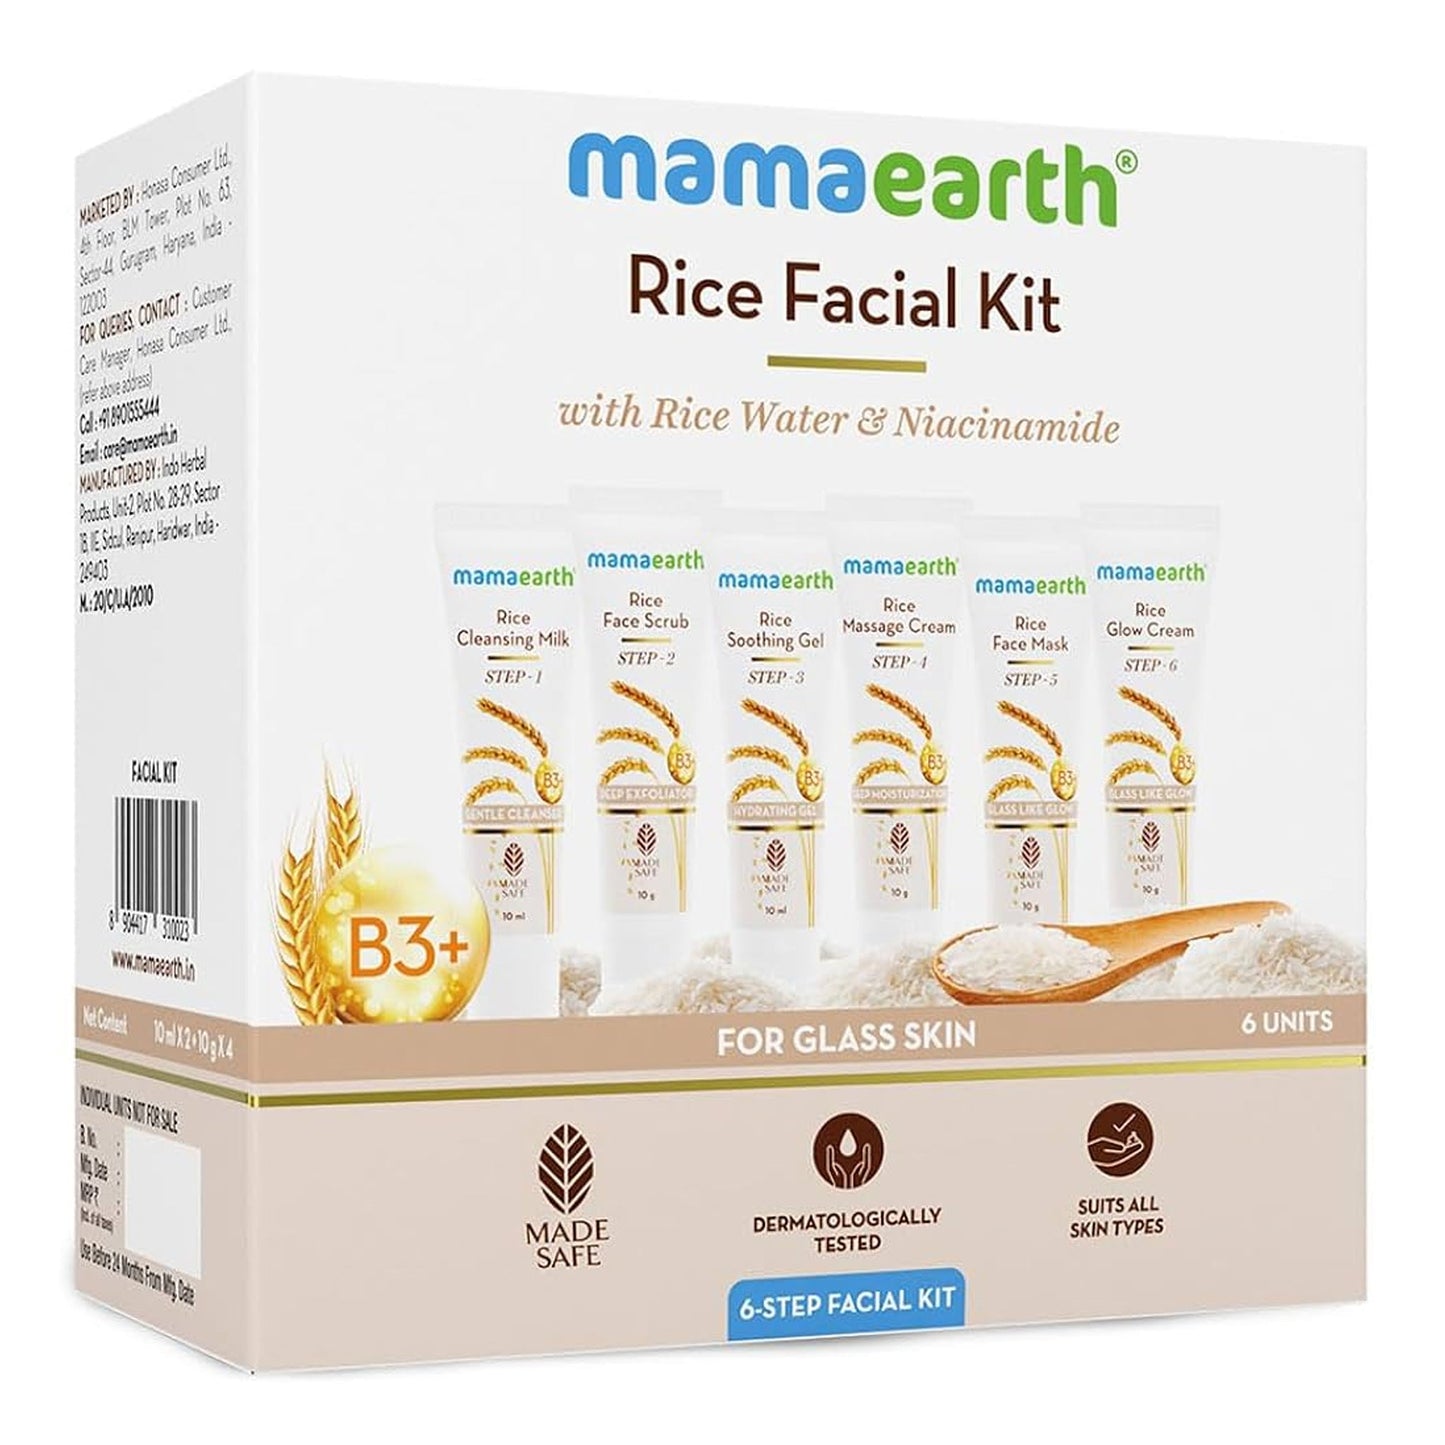 MAMAEARTH - RICE FACIAL KIT WITH RICE WATER & NIACINAMIDE - 60G